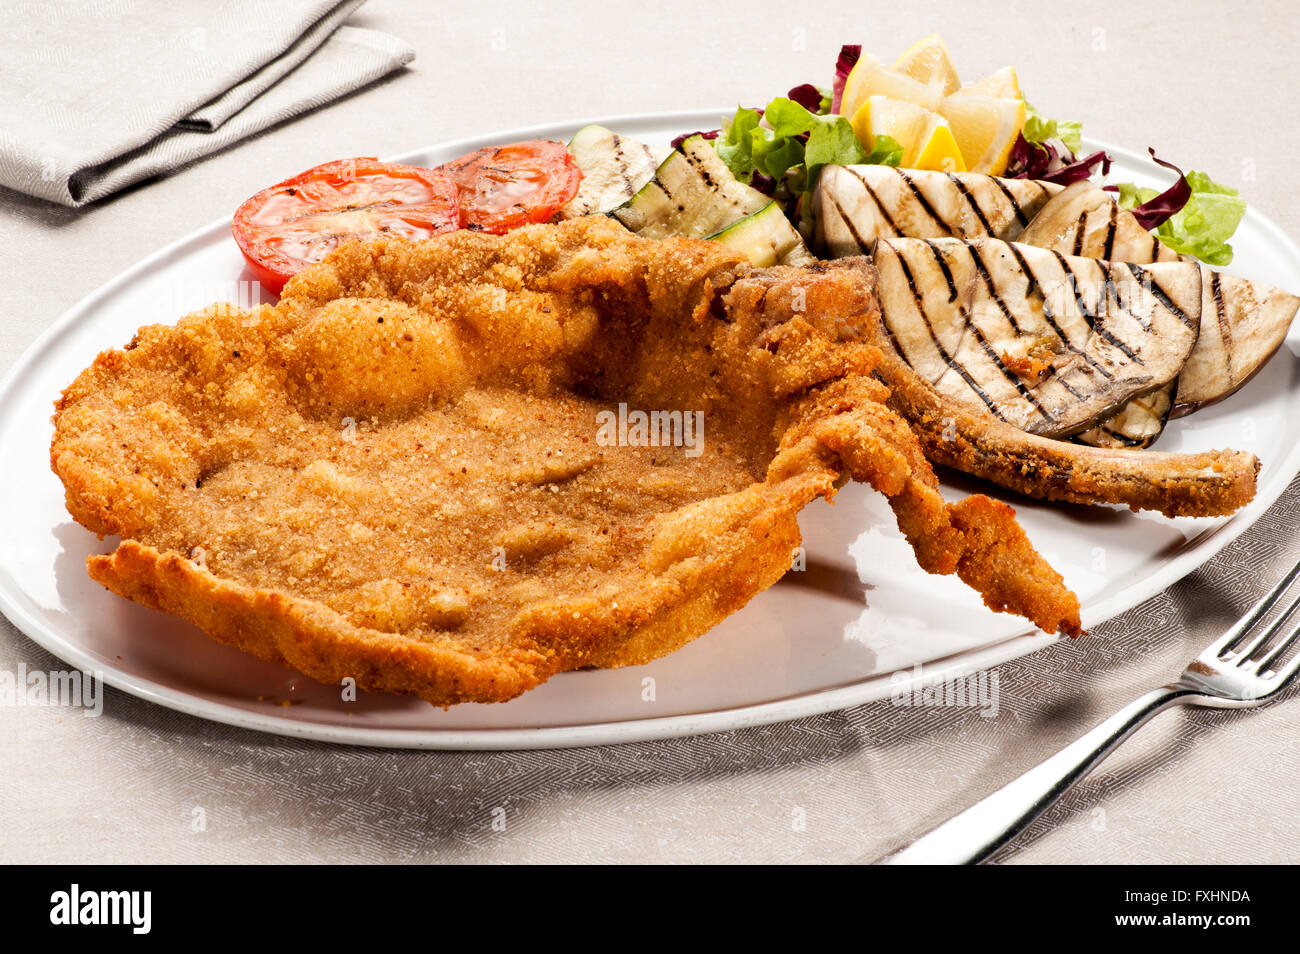 Single serving of fried Milanese cotoletta with tomatoes, lettuce and other ingredients on plate with silverware Stock Photo